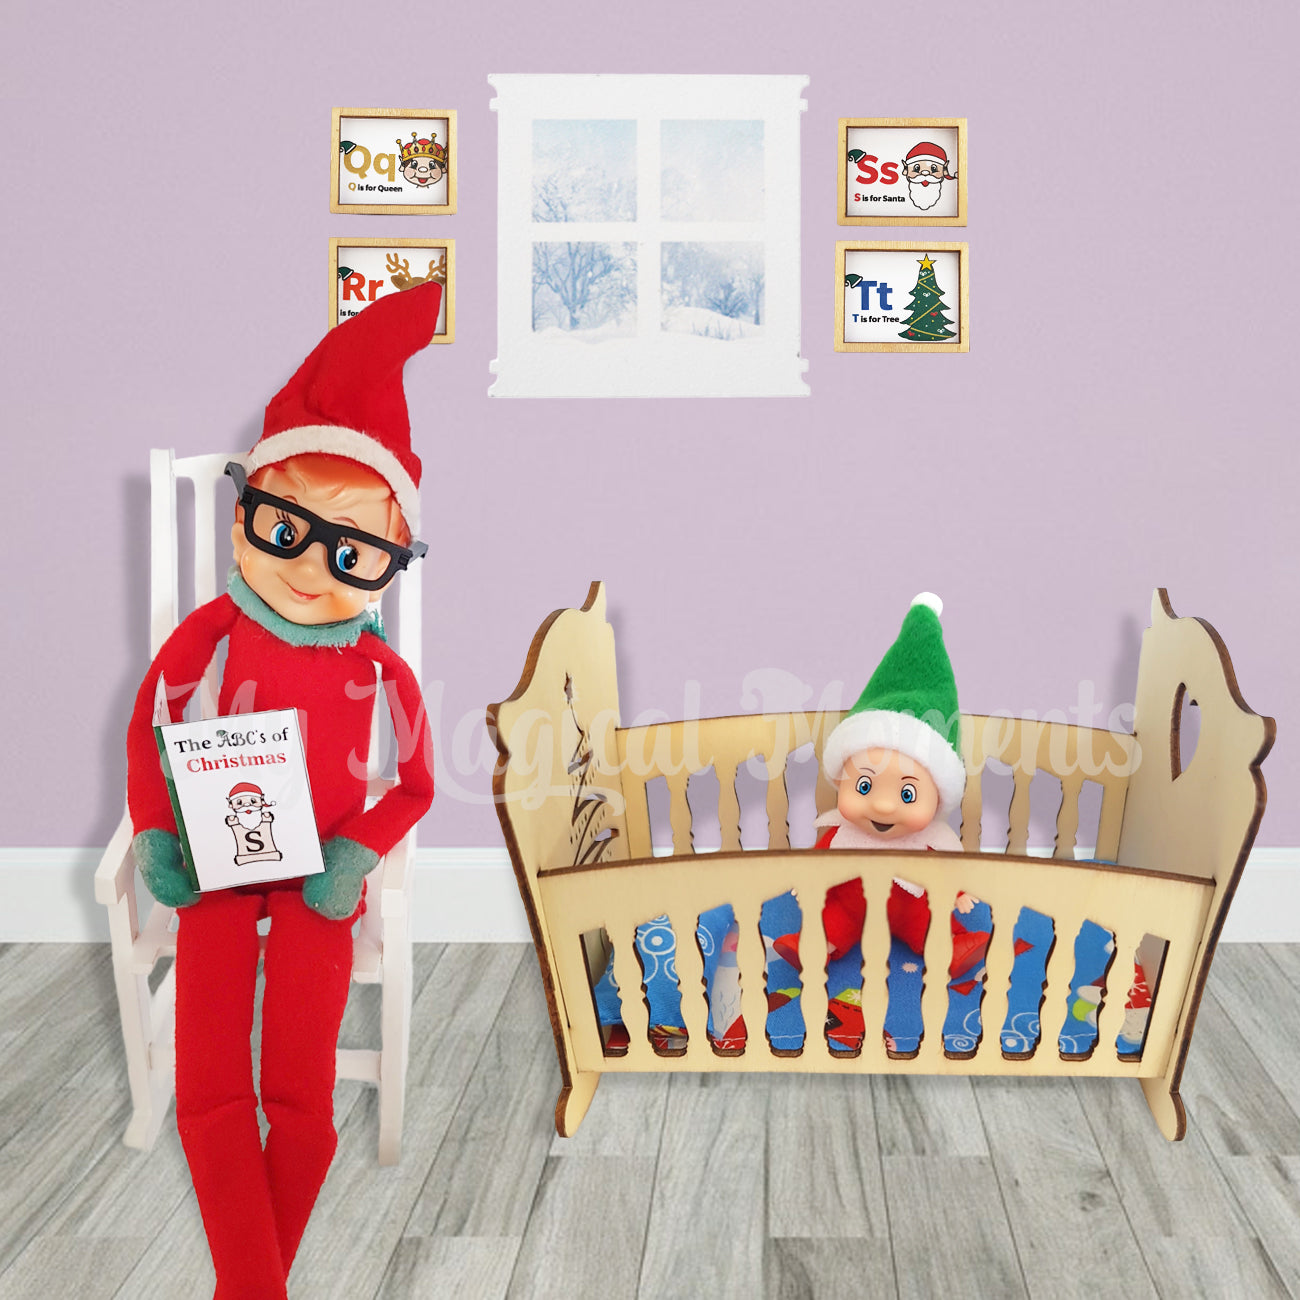 Elf reading an elf baby story in a miniature cot